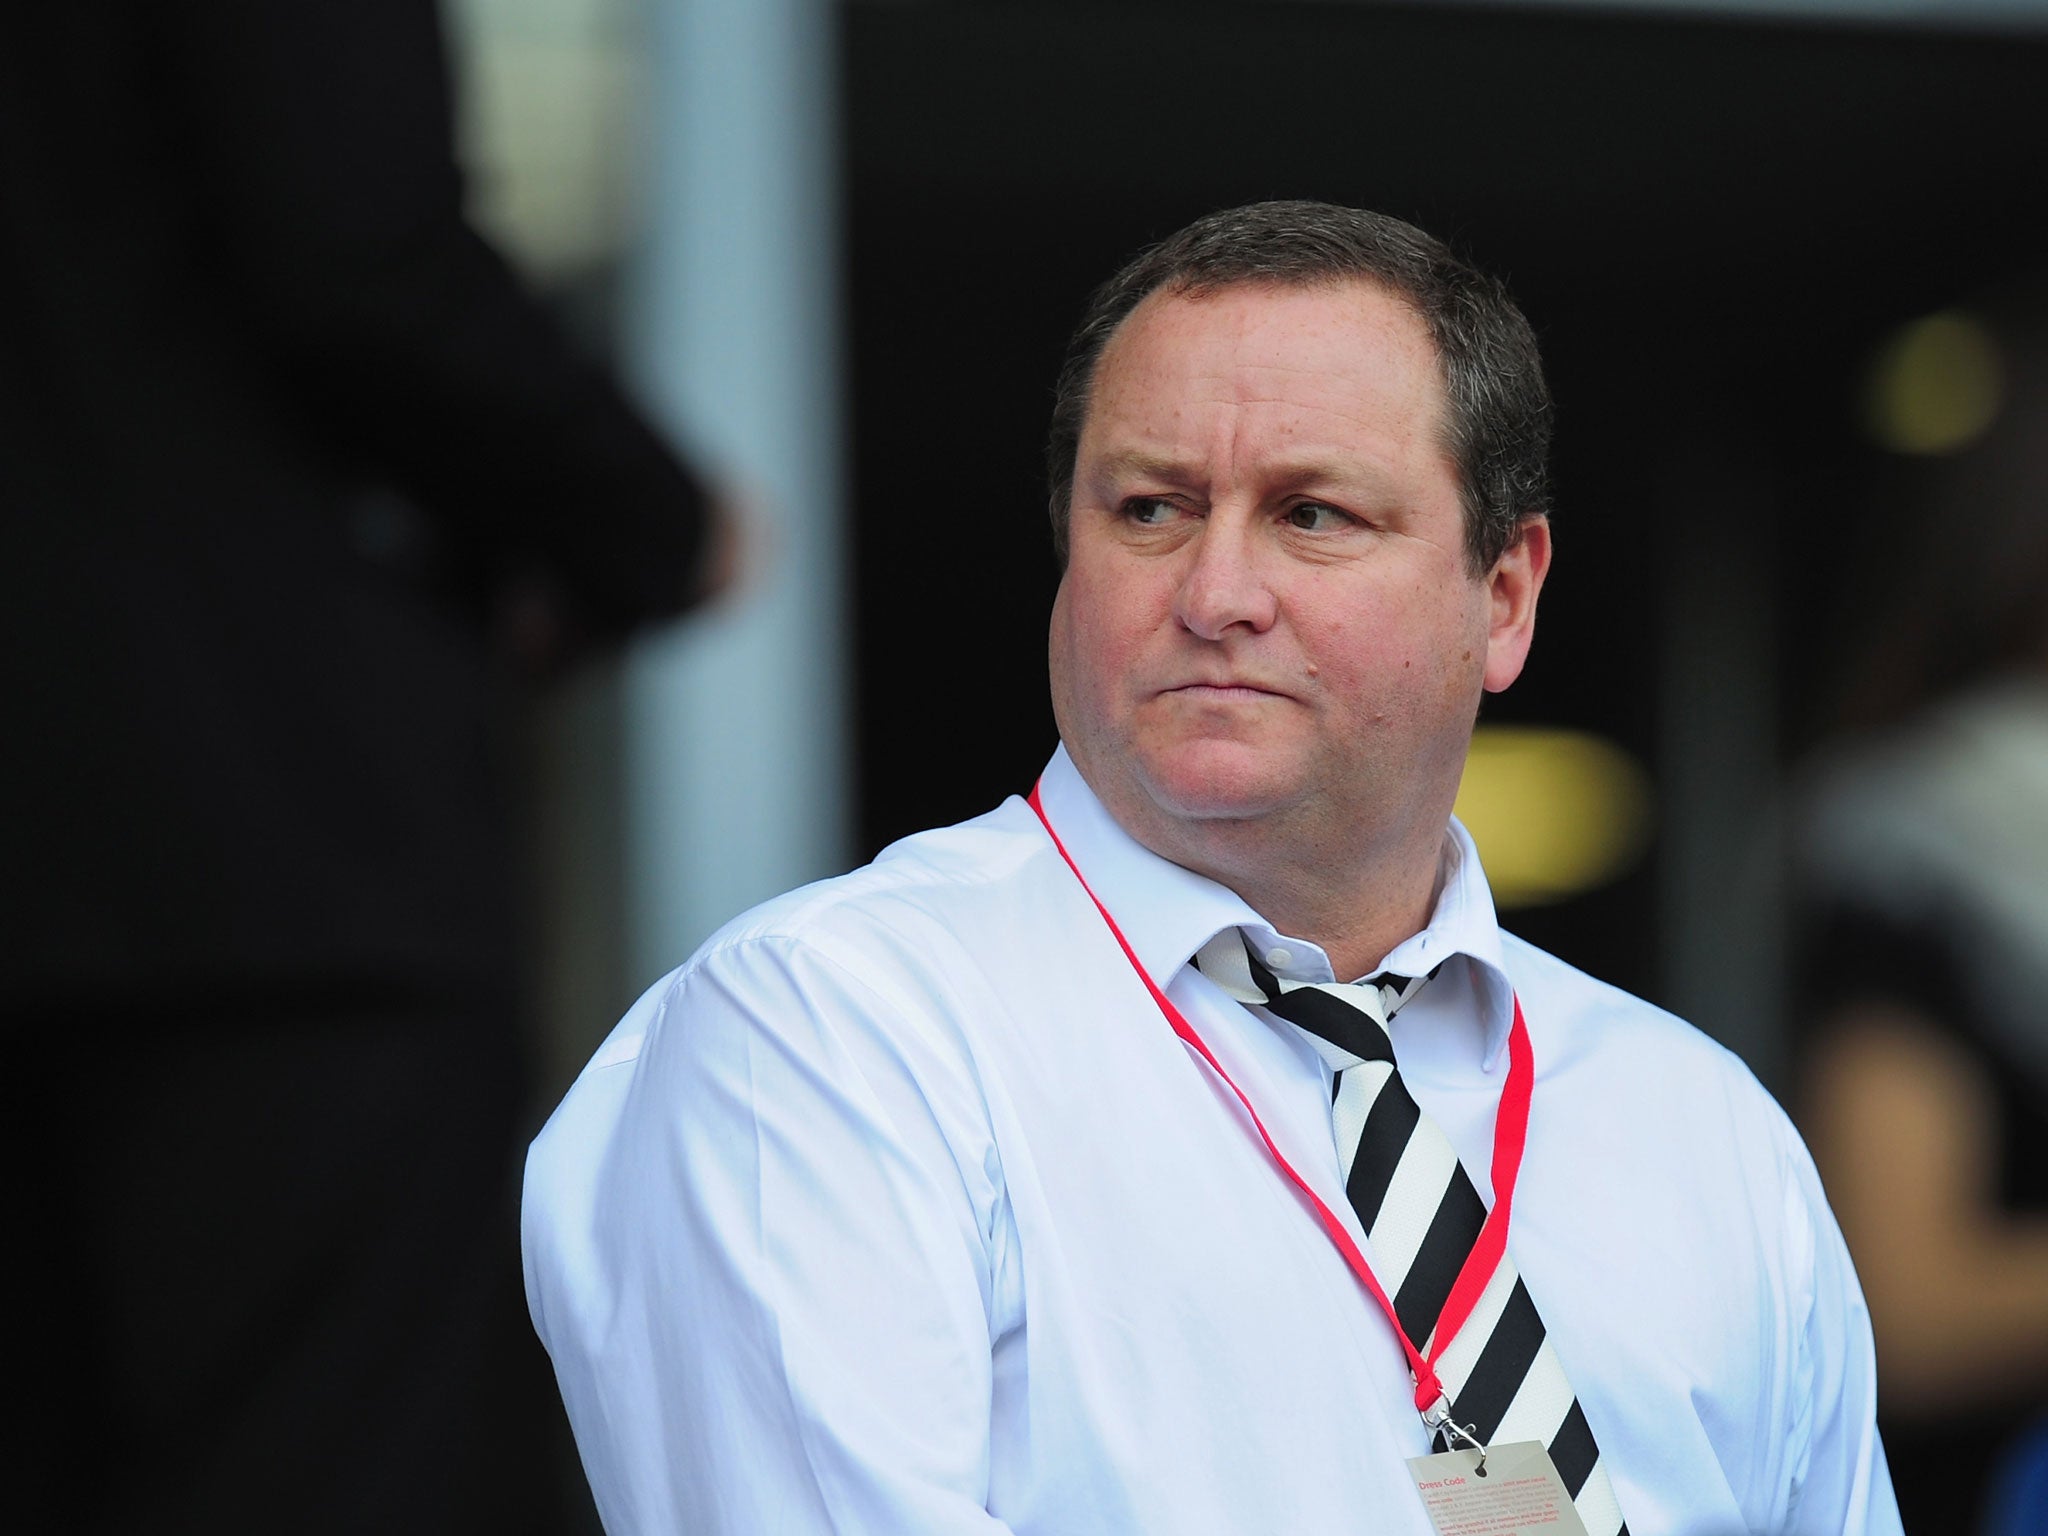 Mike Ashley has mellowed in recent years, so his stake in Debenhams surprised the City